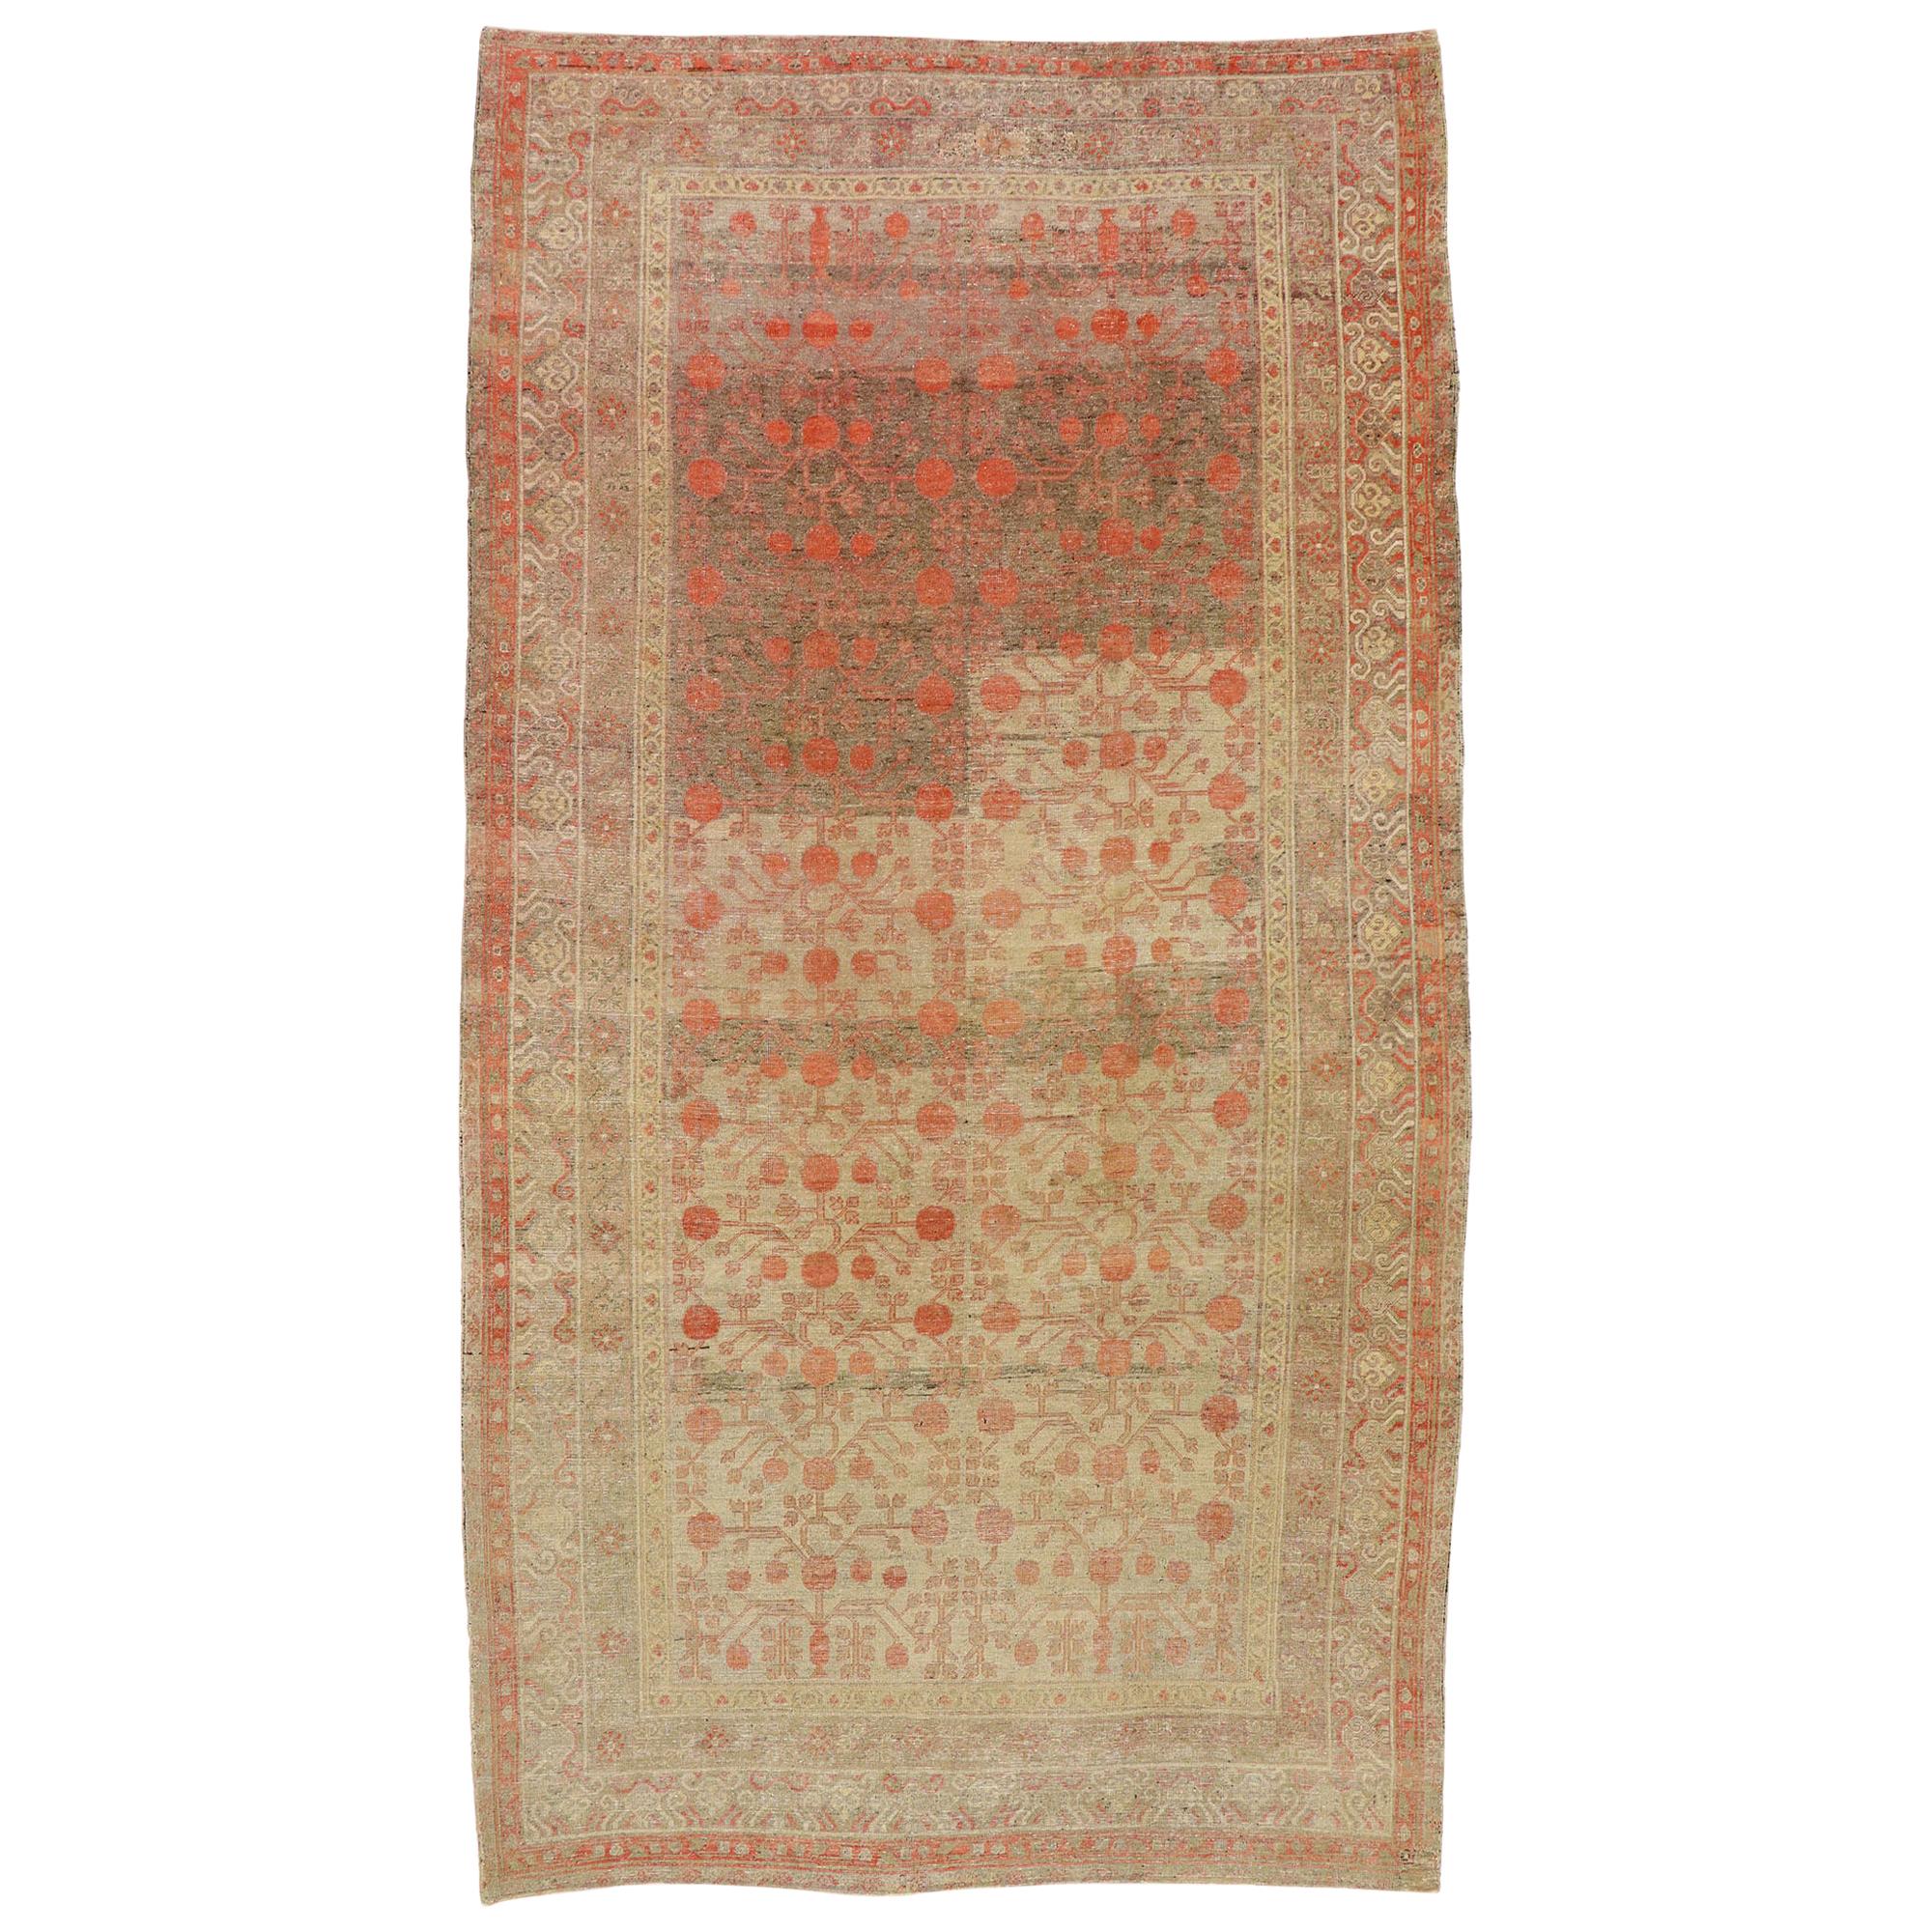 Distressed Antique Khotan Gallery Rug with Pomegranate Design For Sale